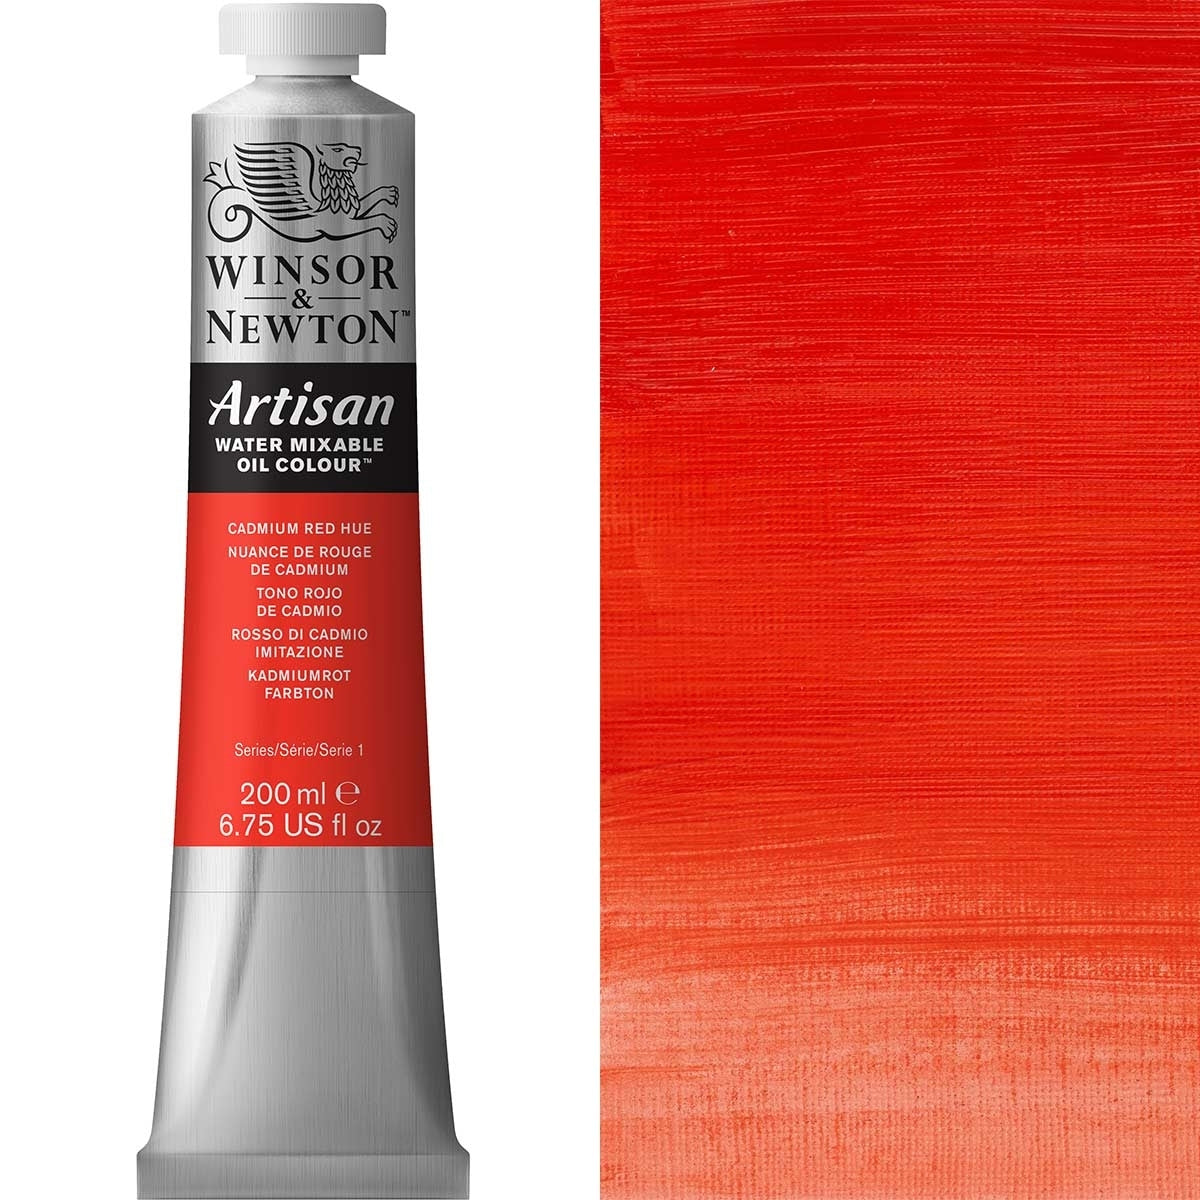 Winsor and Newton - Artisan Oil Colour Watermixable - 200ml - Cadmium Red Hue